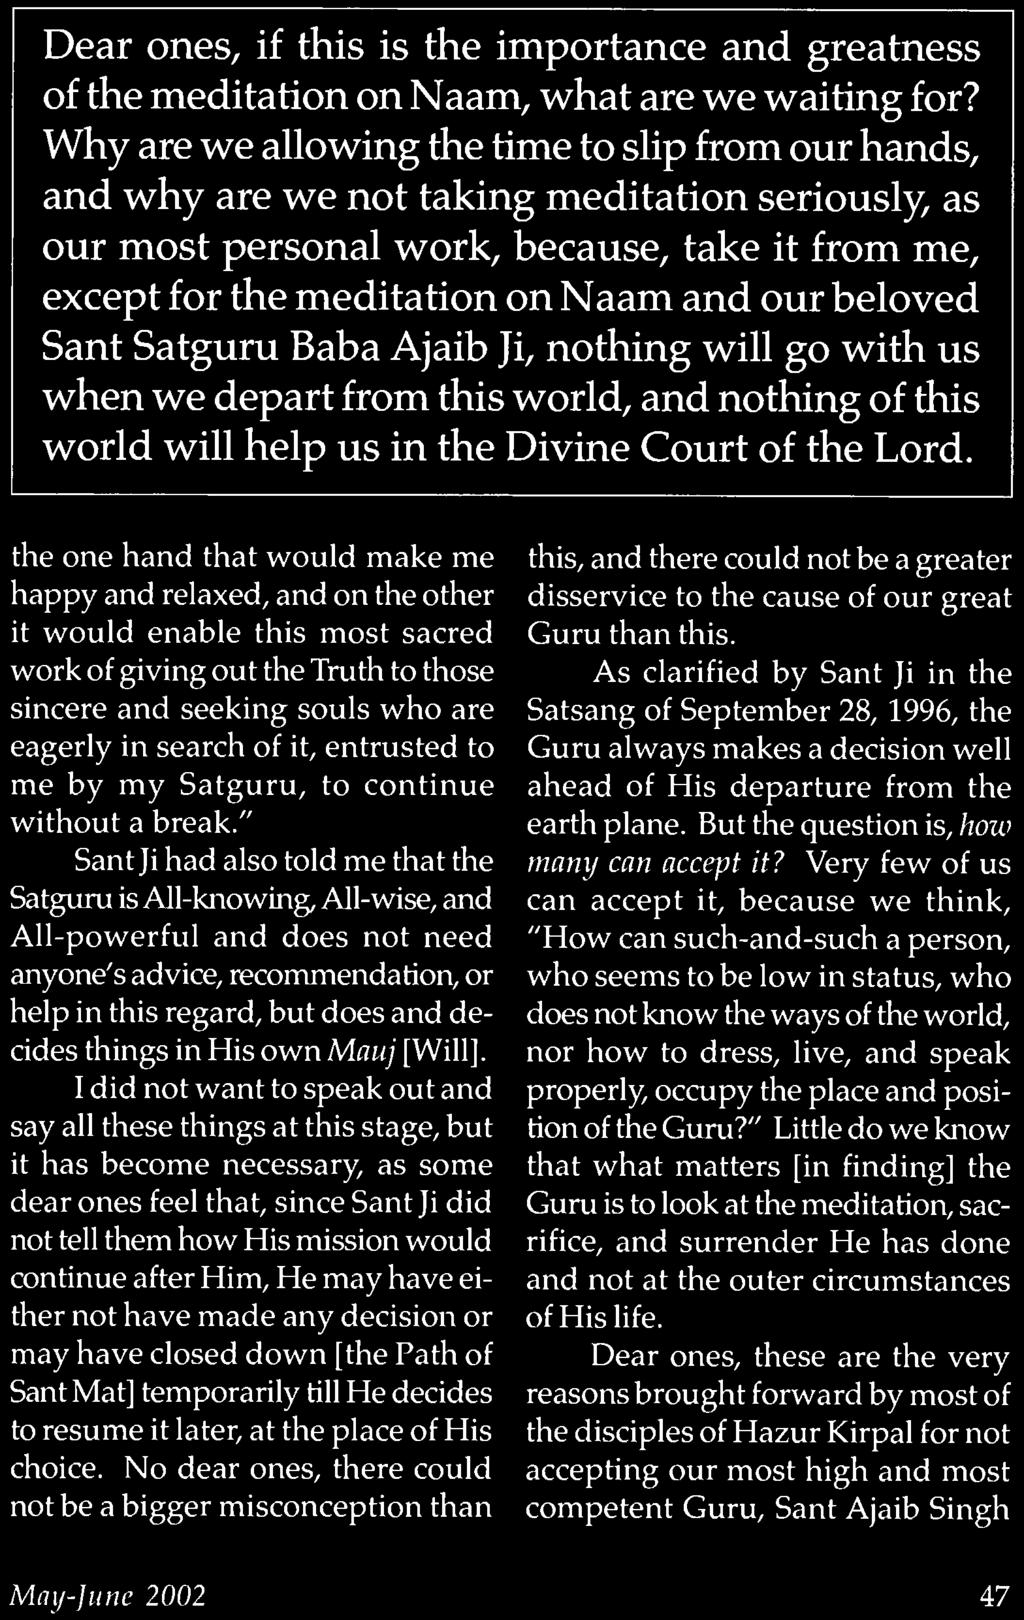 beloved Sant Satguru Baba Ajaib Ji, nothing will go with us when we depart from this world, and nothing of this world will help us in the Divine Court of the Lord.